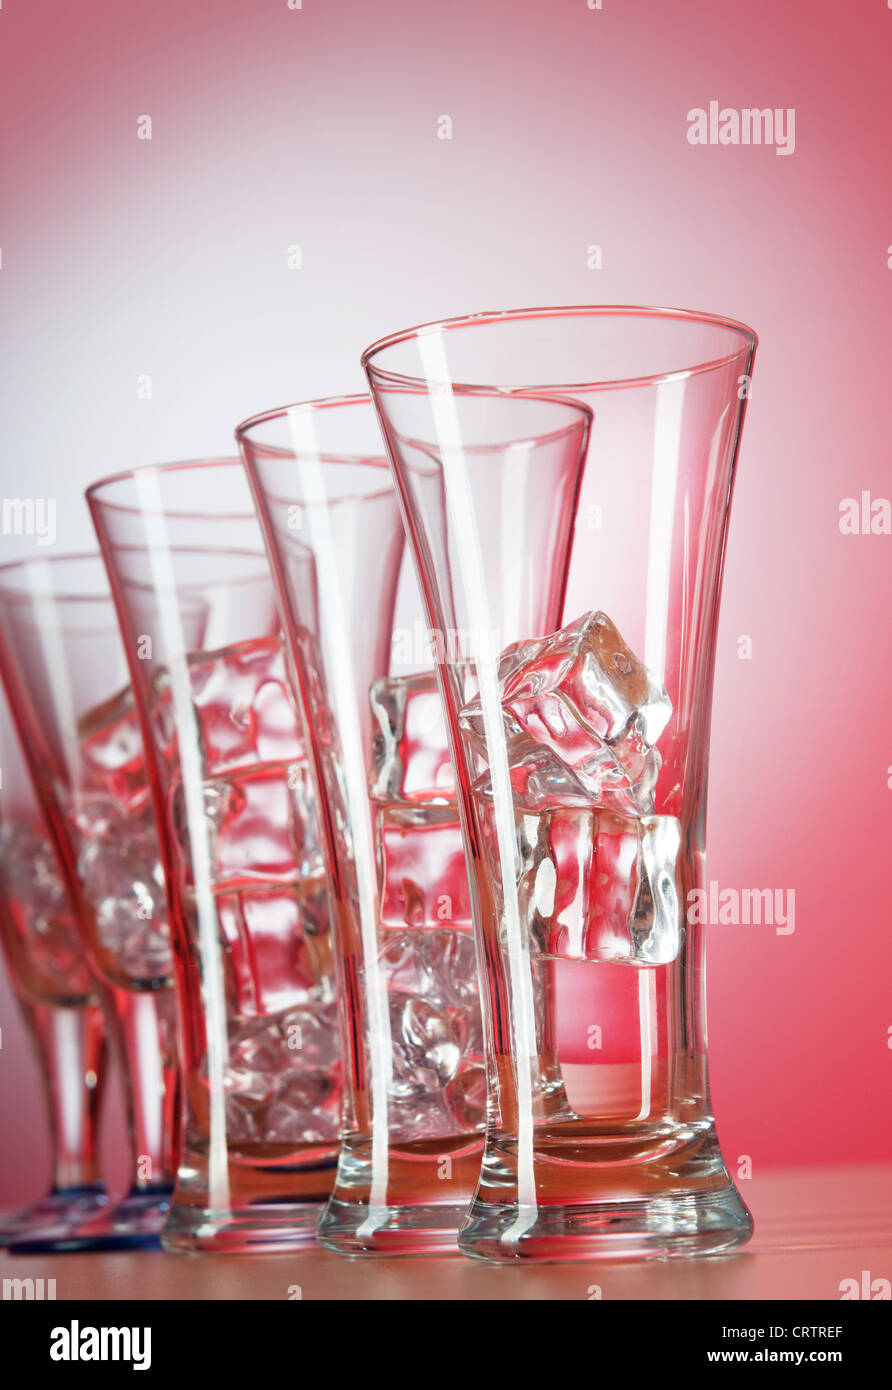 Glasses of water against gradient background Stock Photo